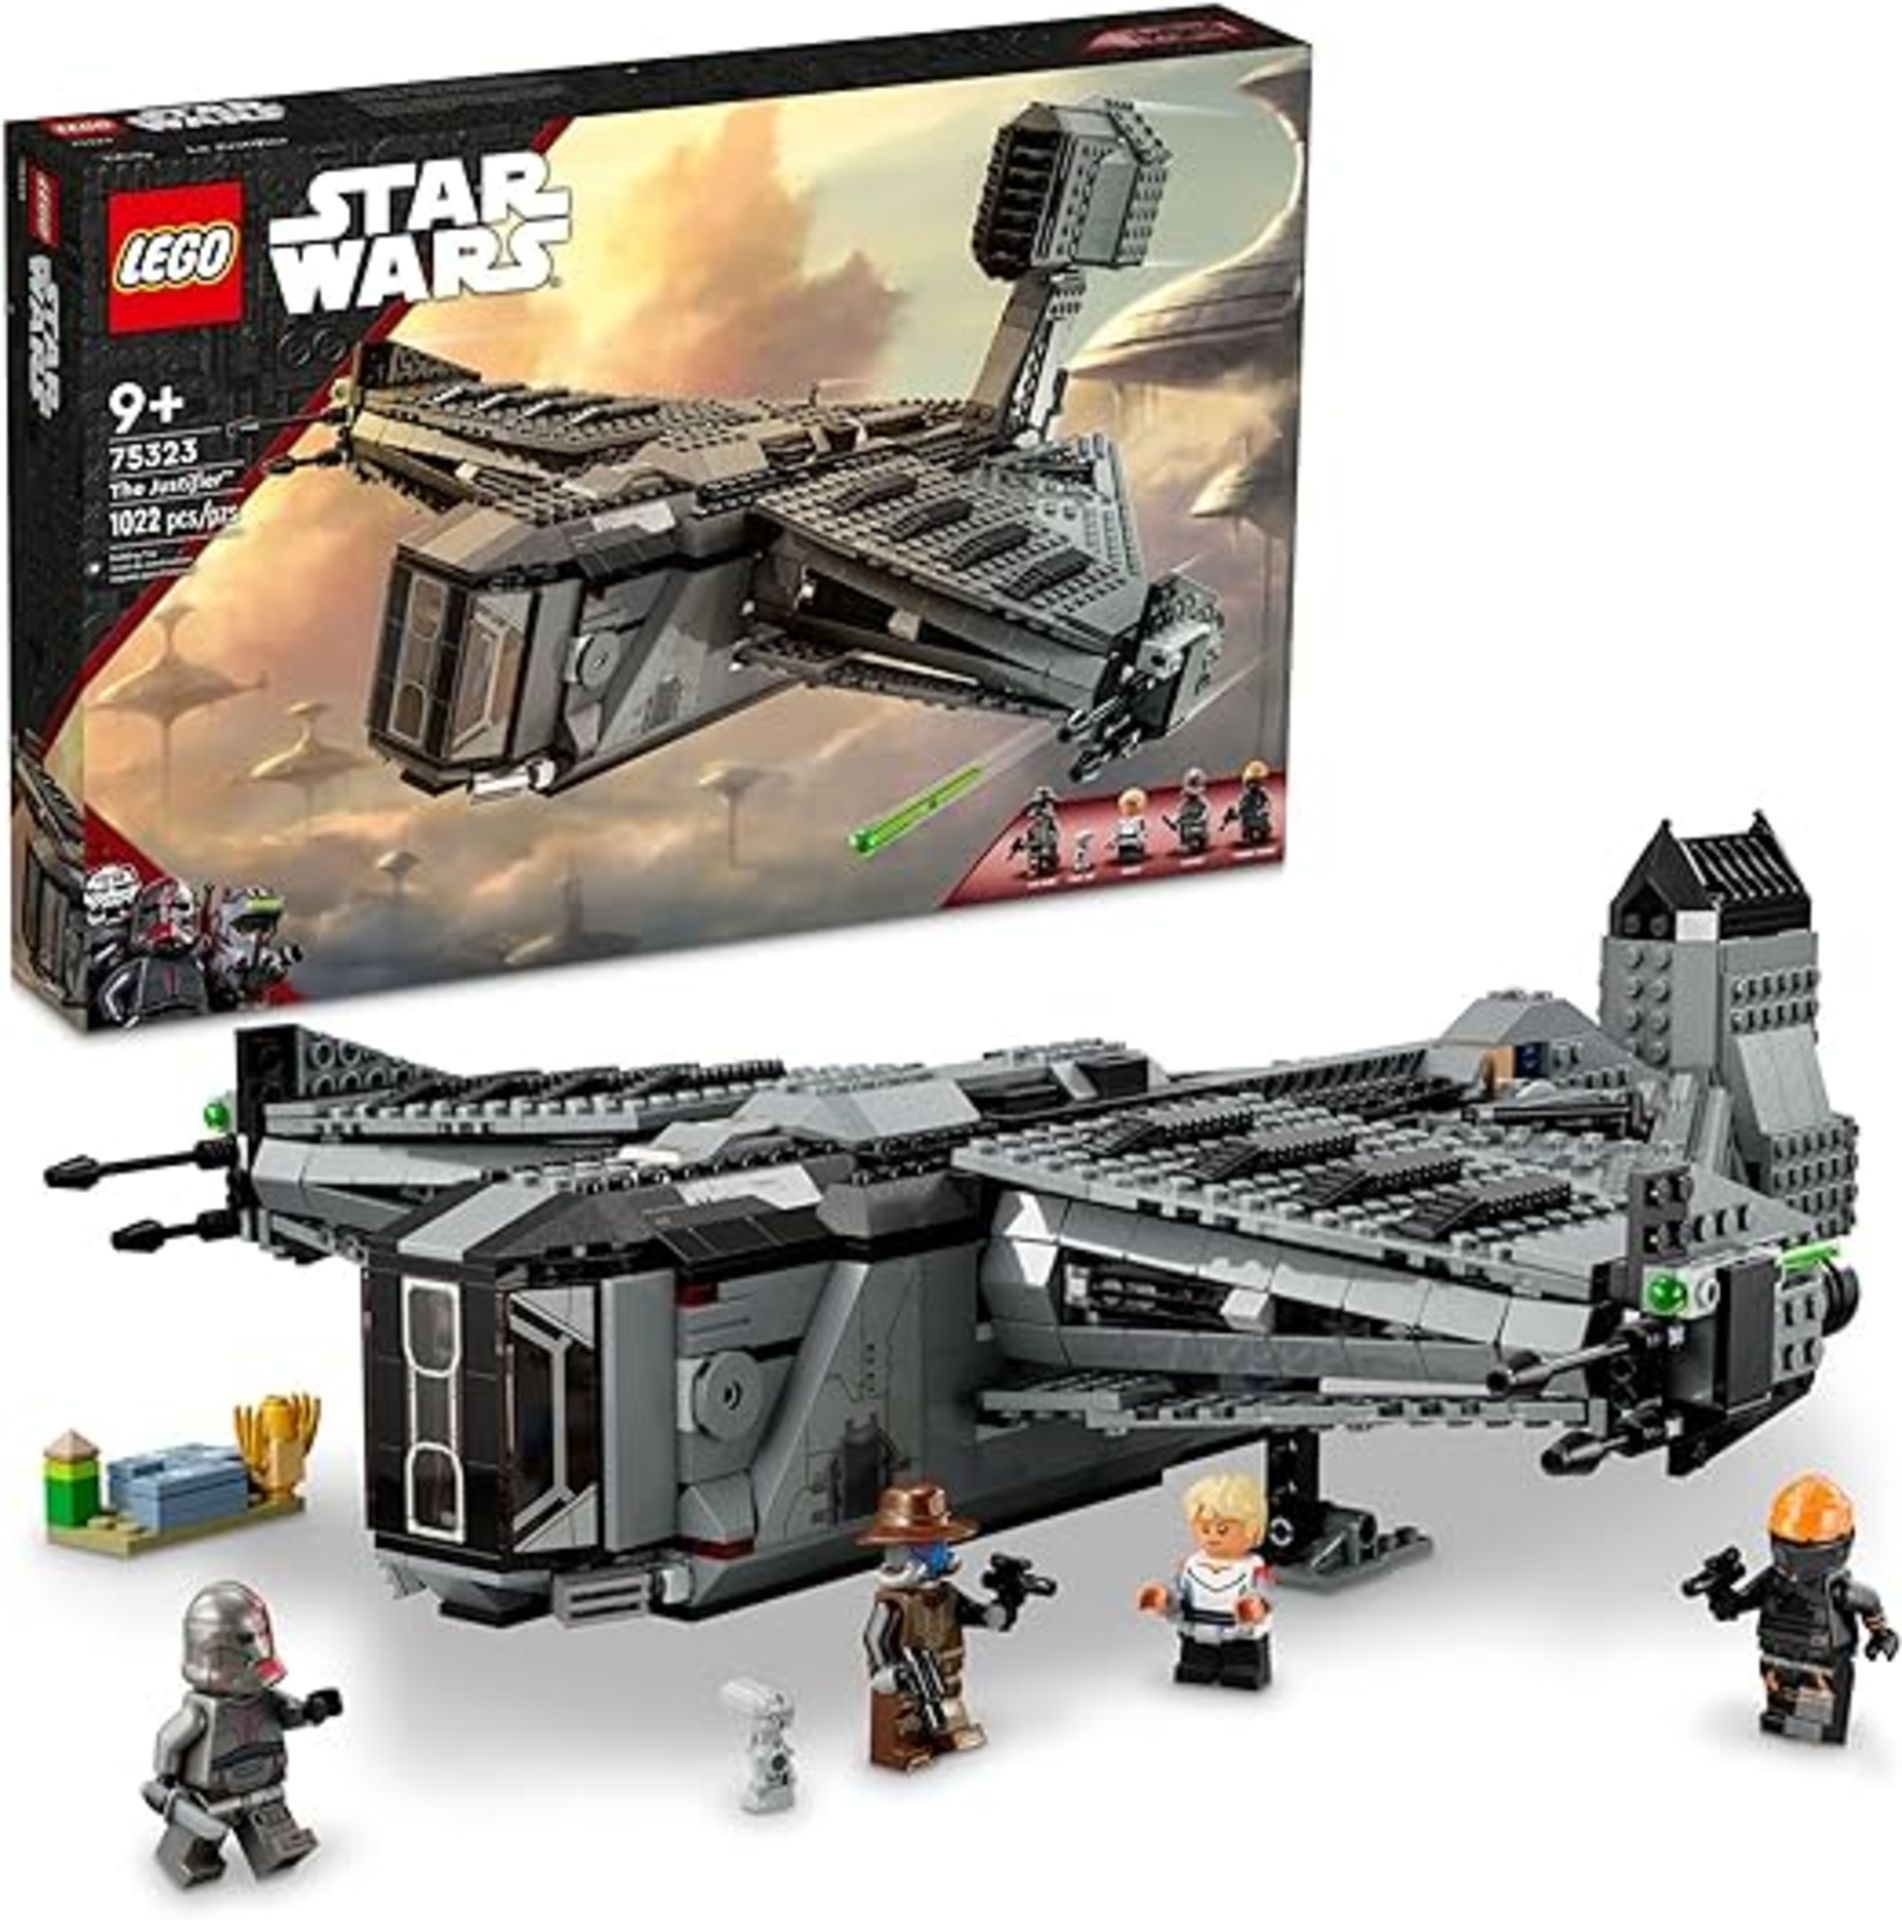 LEGO Star Wars The Justifier 75323 Building Toy Set. - ER22. RRP £239.99. Features a LEGO Star